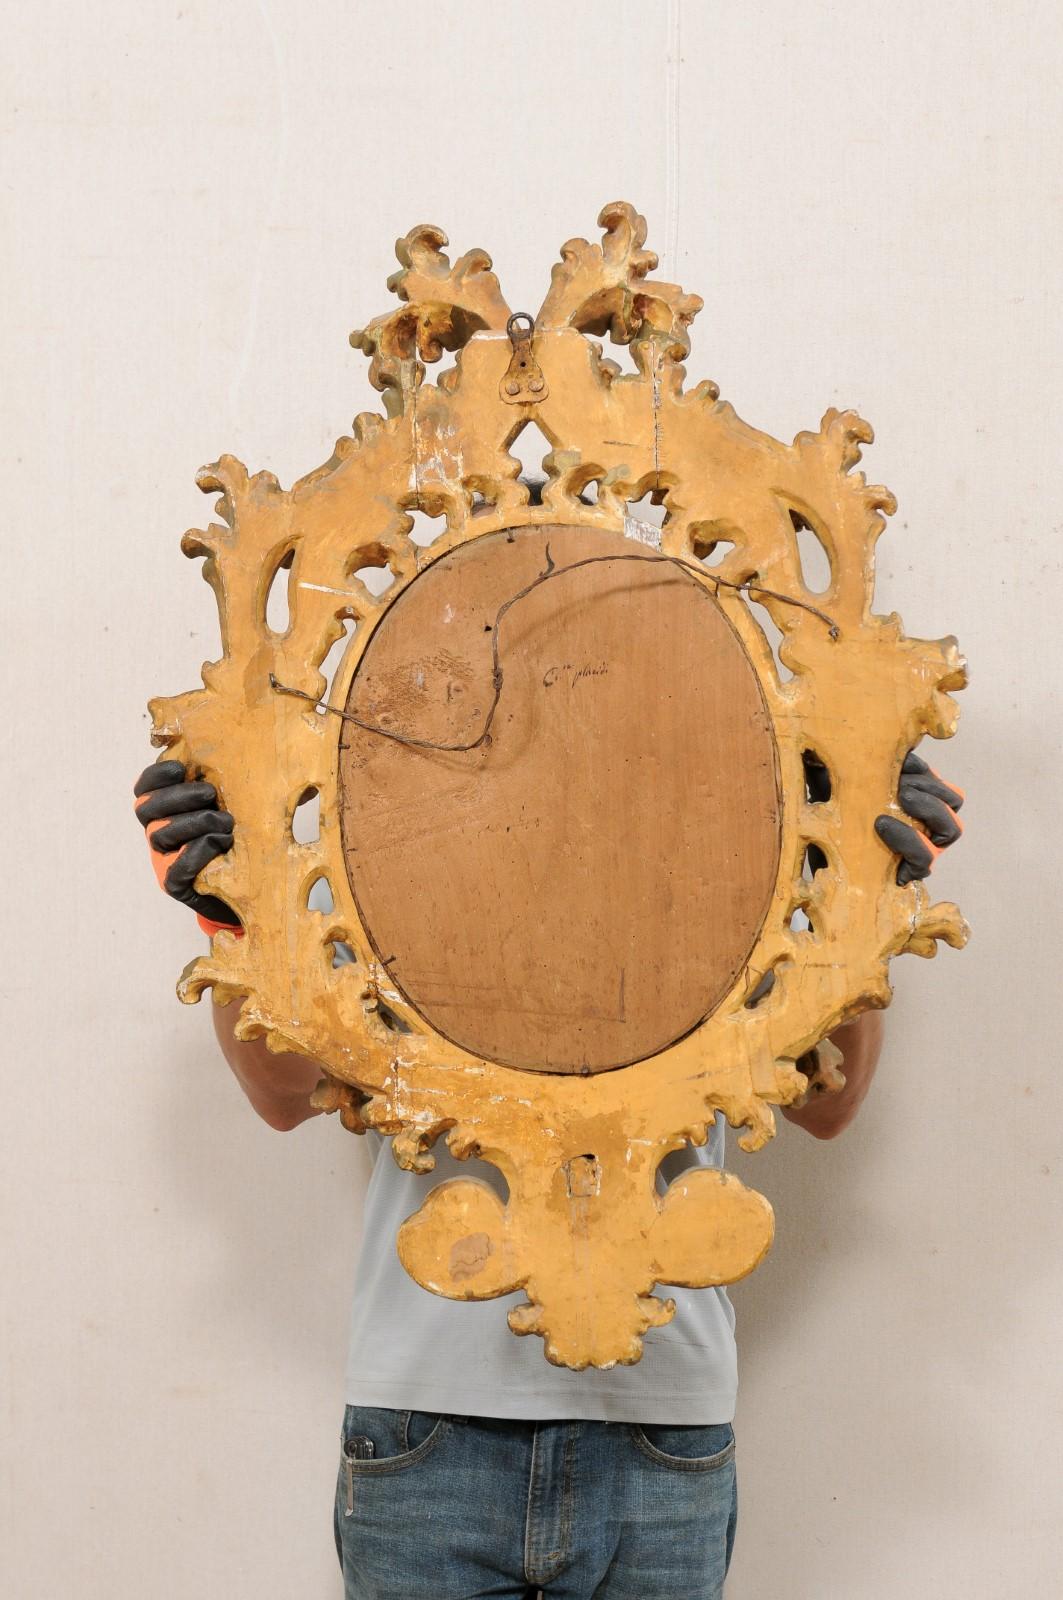 Italian Ornate Acanthus-Carved Mirror w/Oblong, Oval-Shaped Glass, 18th/19th C. For Sale 6